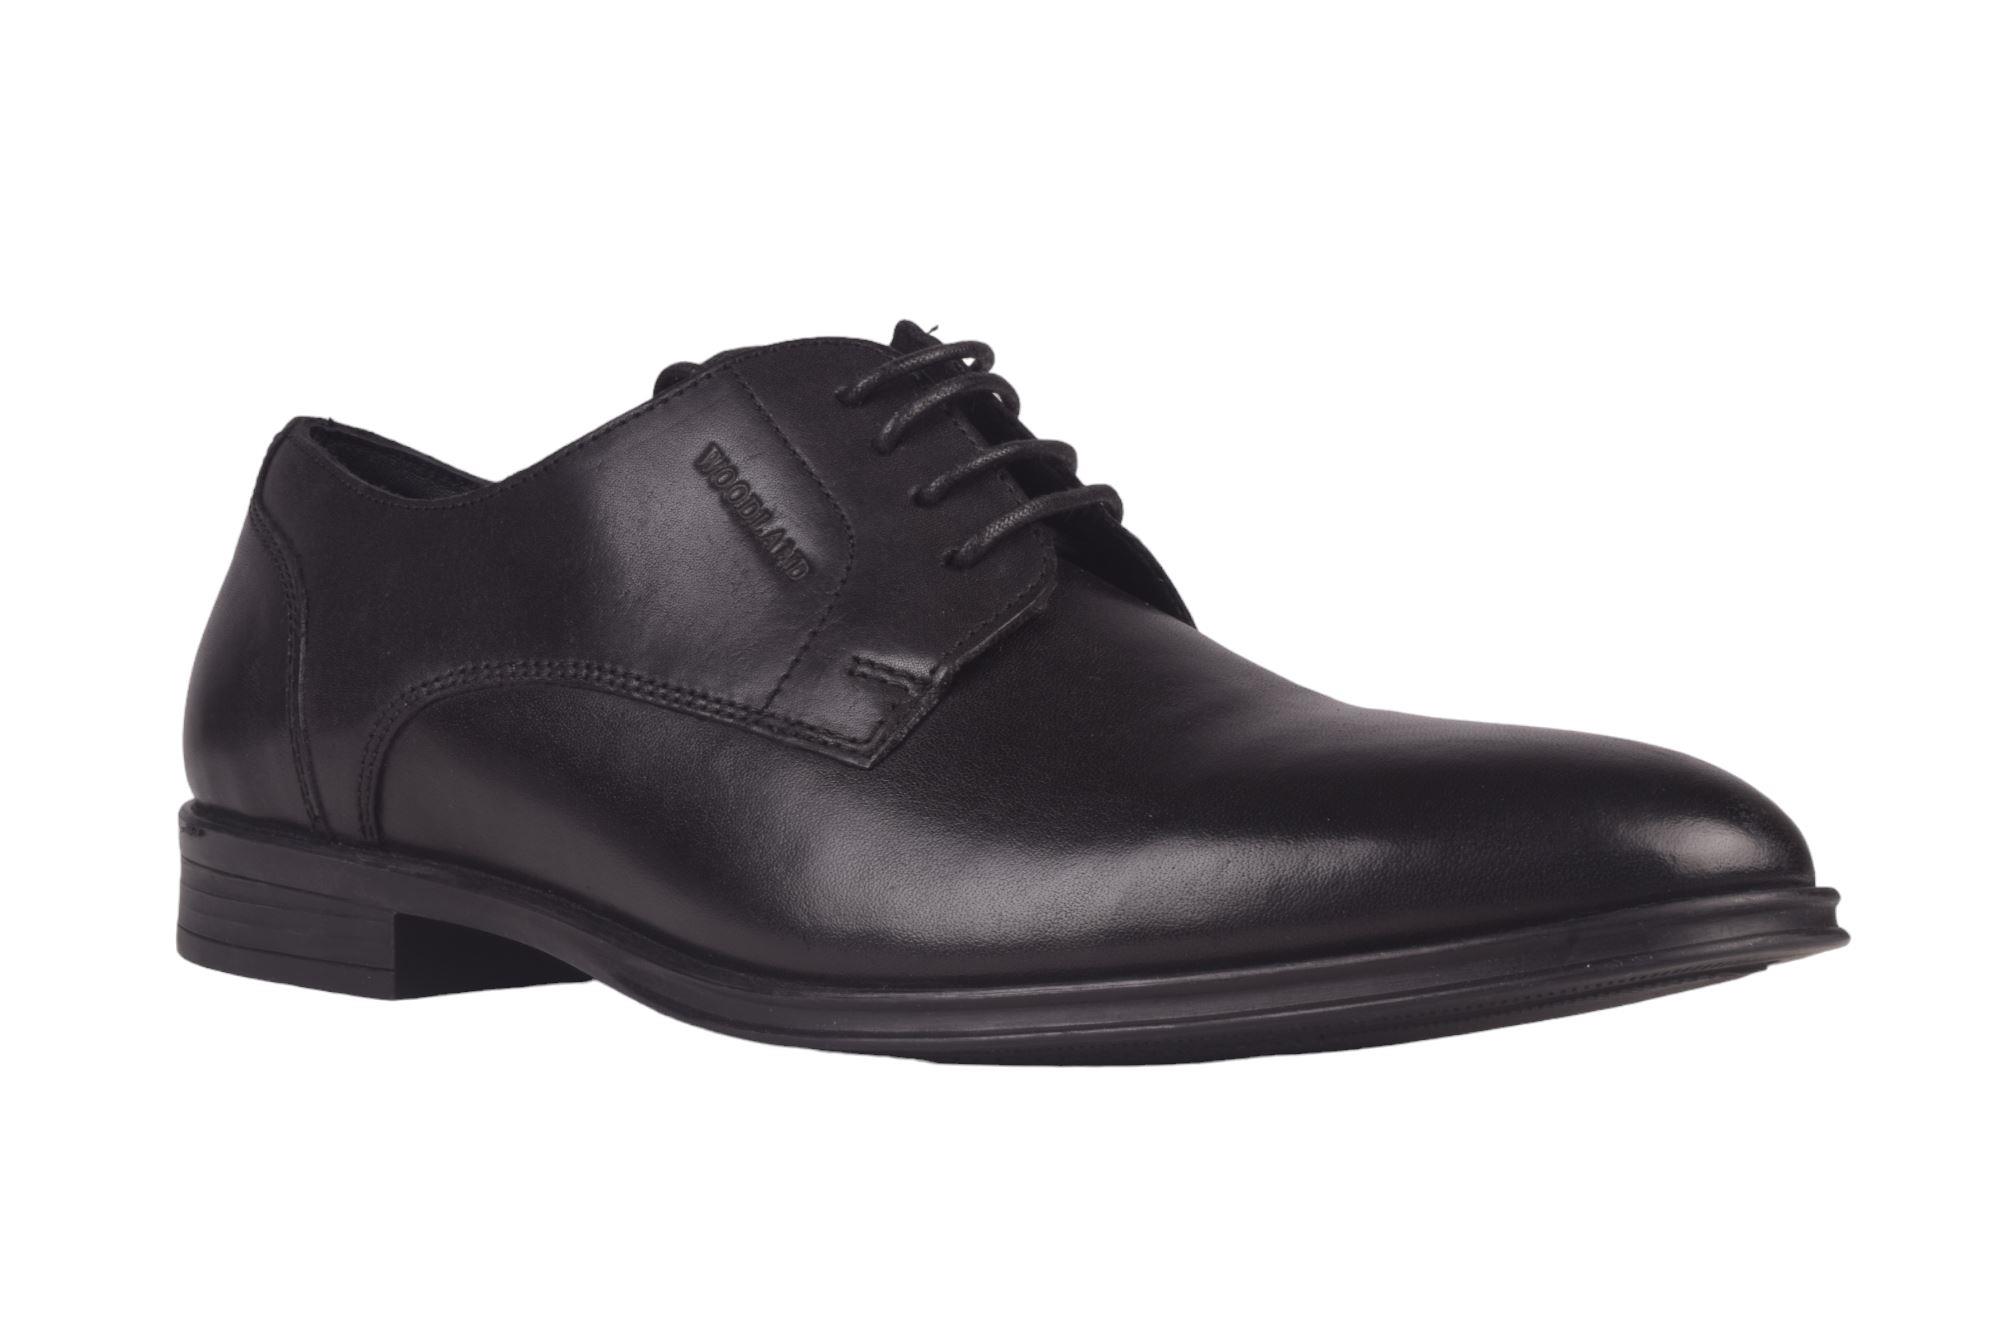 Buy Woodland Men's Black Leather Formal Shoes-9 UK (43 EU) (GW 4139021) at  Amazon.in